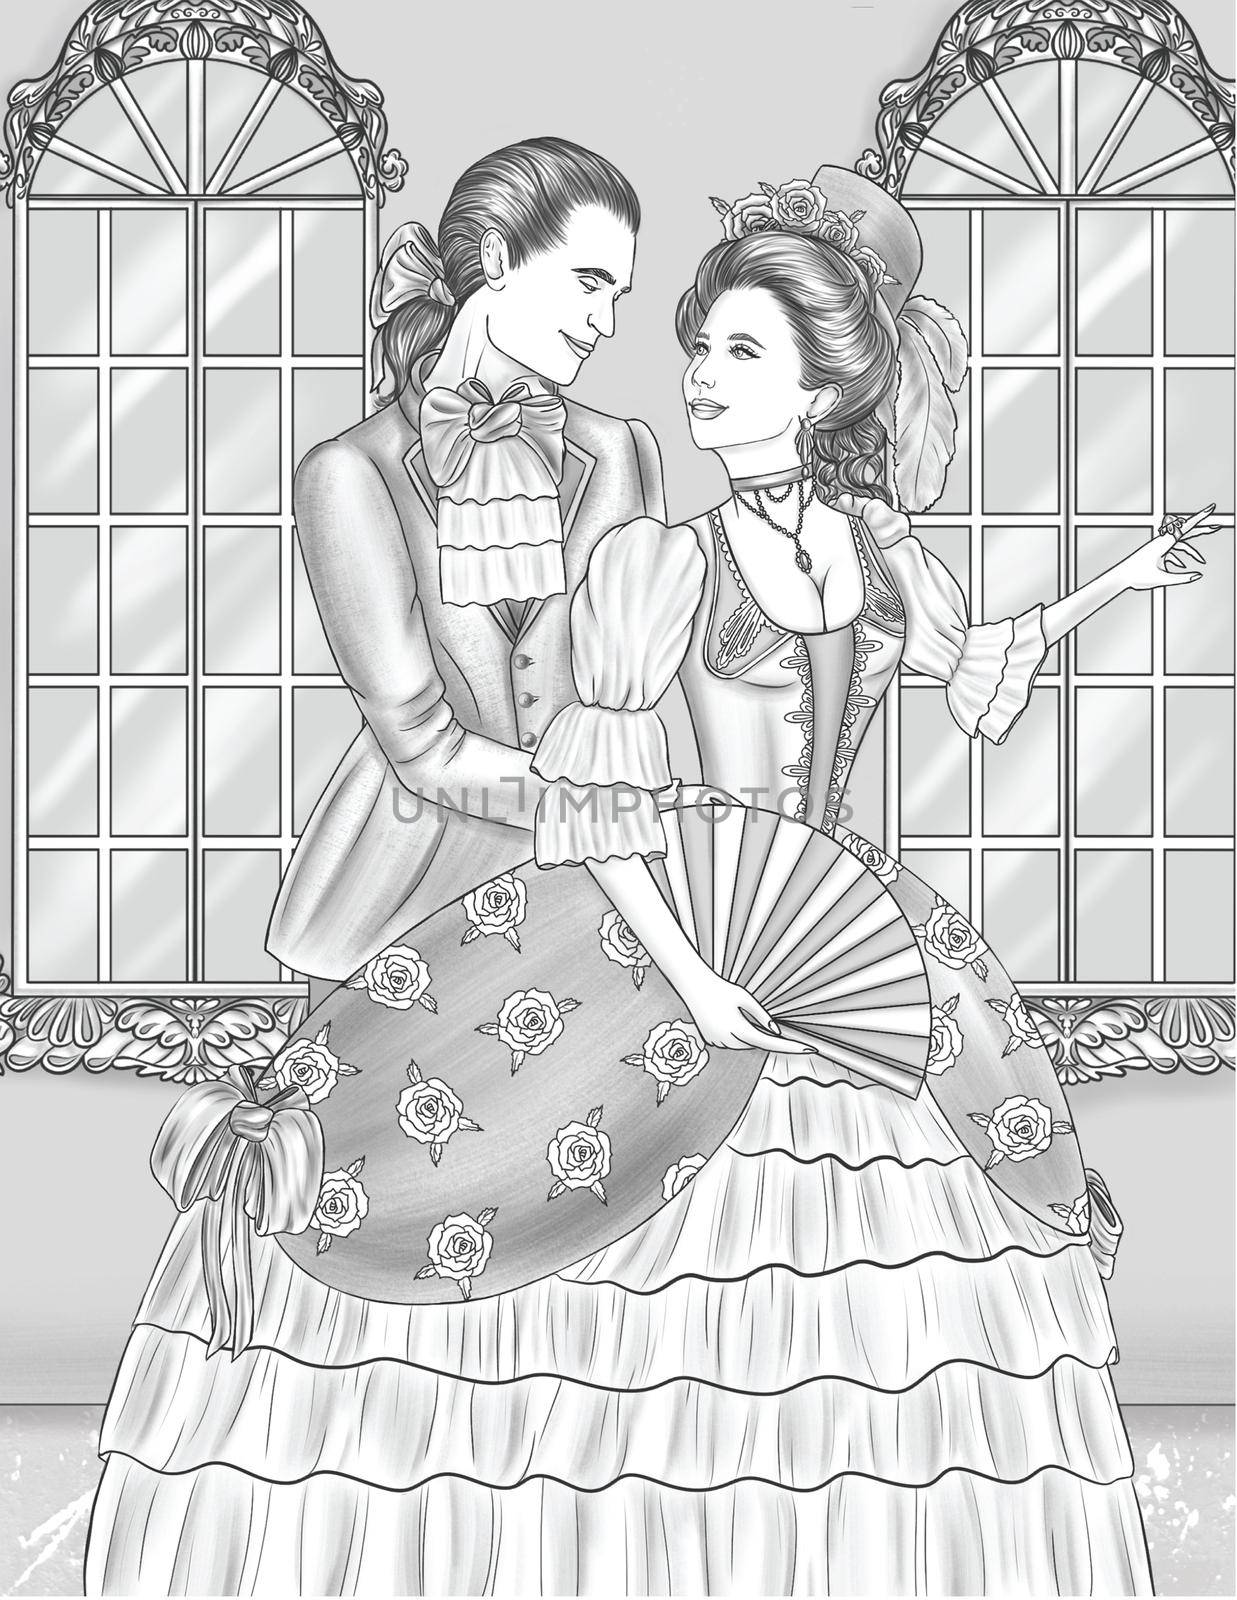 Man And Woman In Vintage Attire Standing Looking At Each Other Line Drawing.